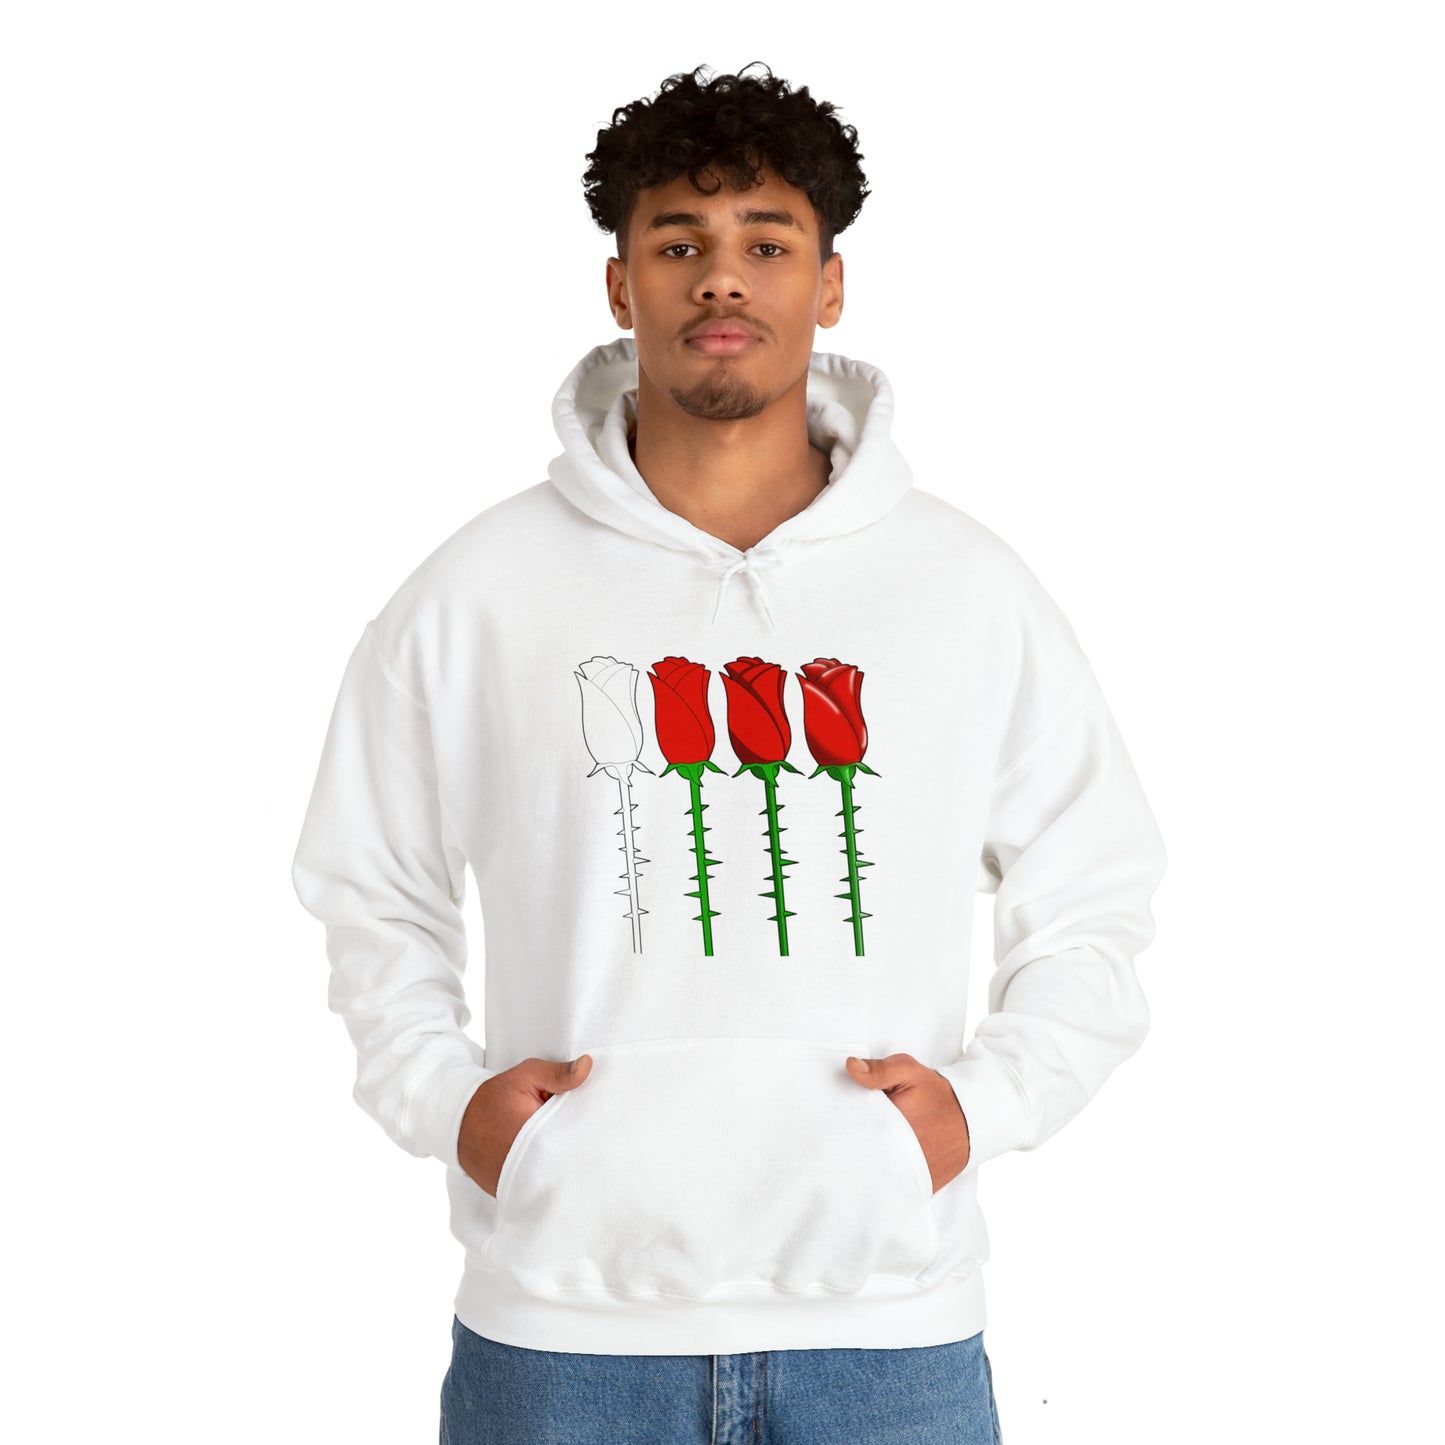 Roses Evolved Rendering Stages Soft Highlights Unisex Hooded Sweatshirt